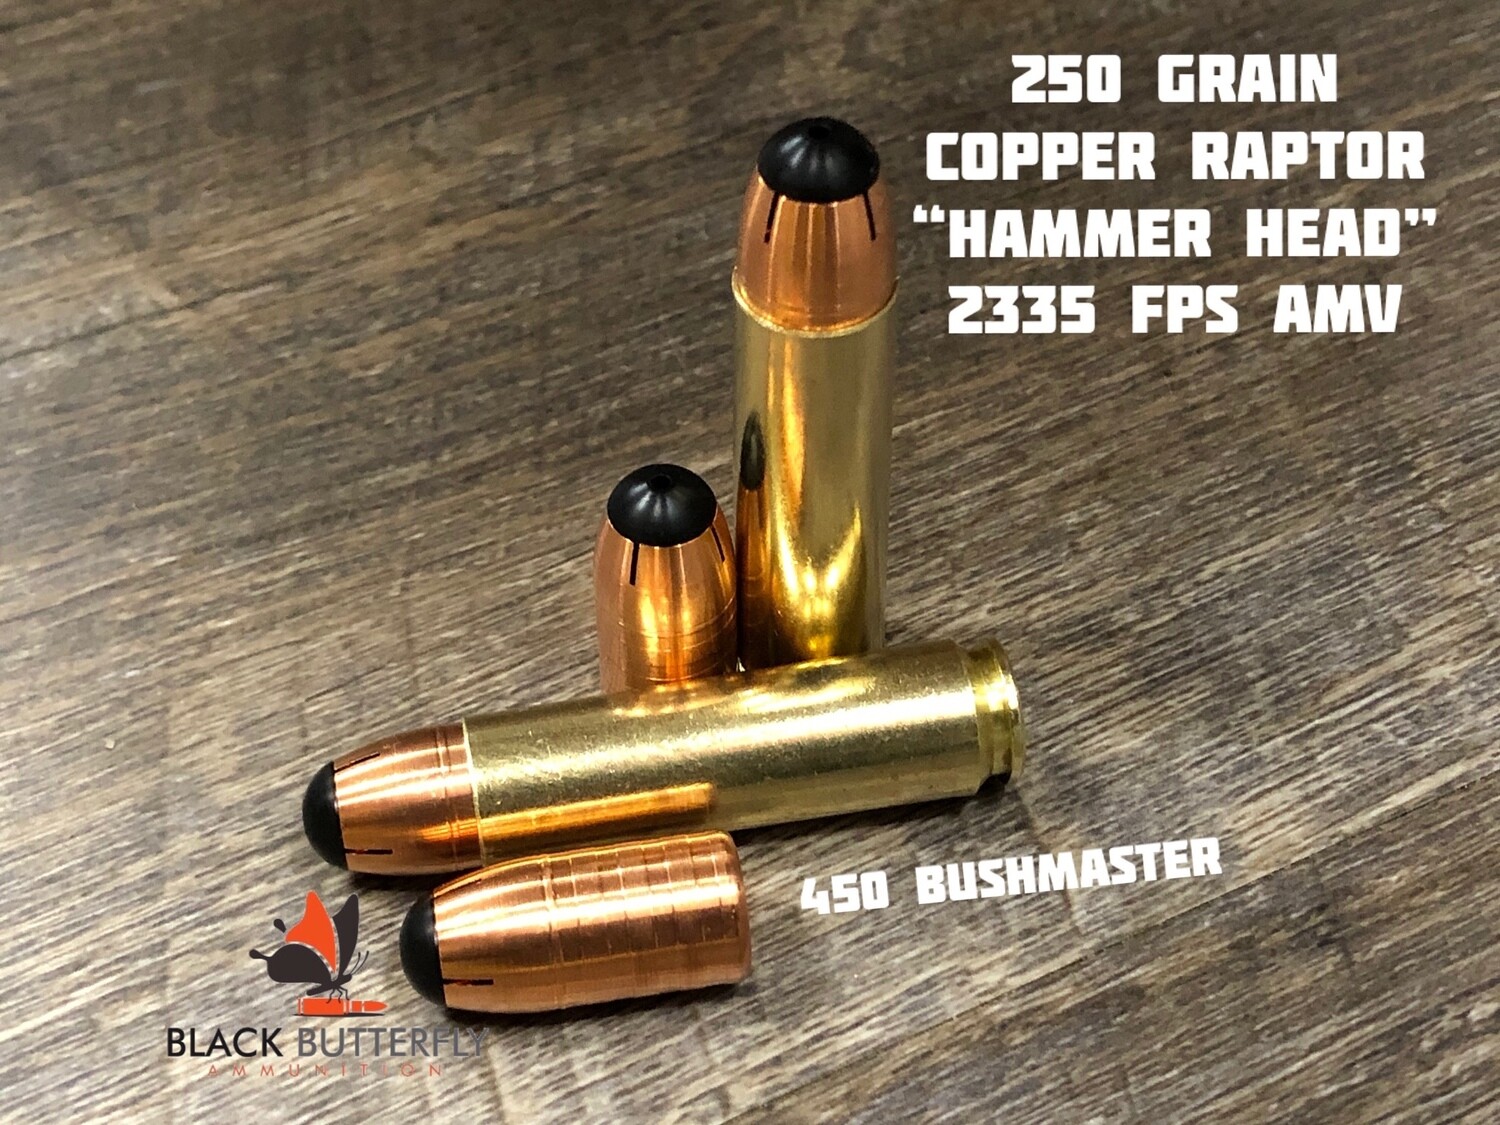 Black Butterfly Ammunition Premium, .450 BUSHMASTER, 250 gr, 5 Rounds, Cutting Edge FB RAPTOR "HAMMER HEAD" **BOLT ACTIONS ONLY** (SAMPLE PACK)